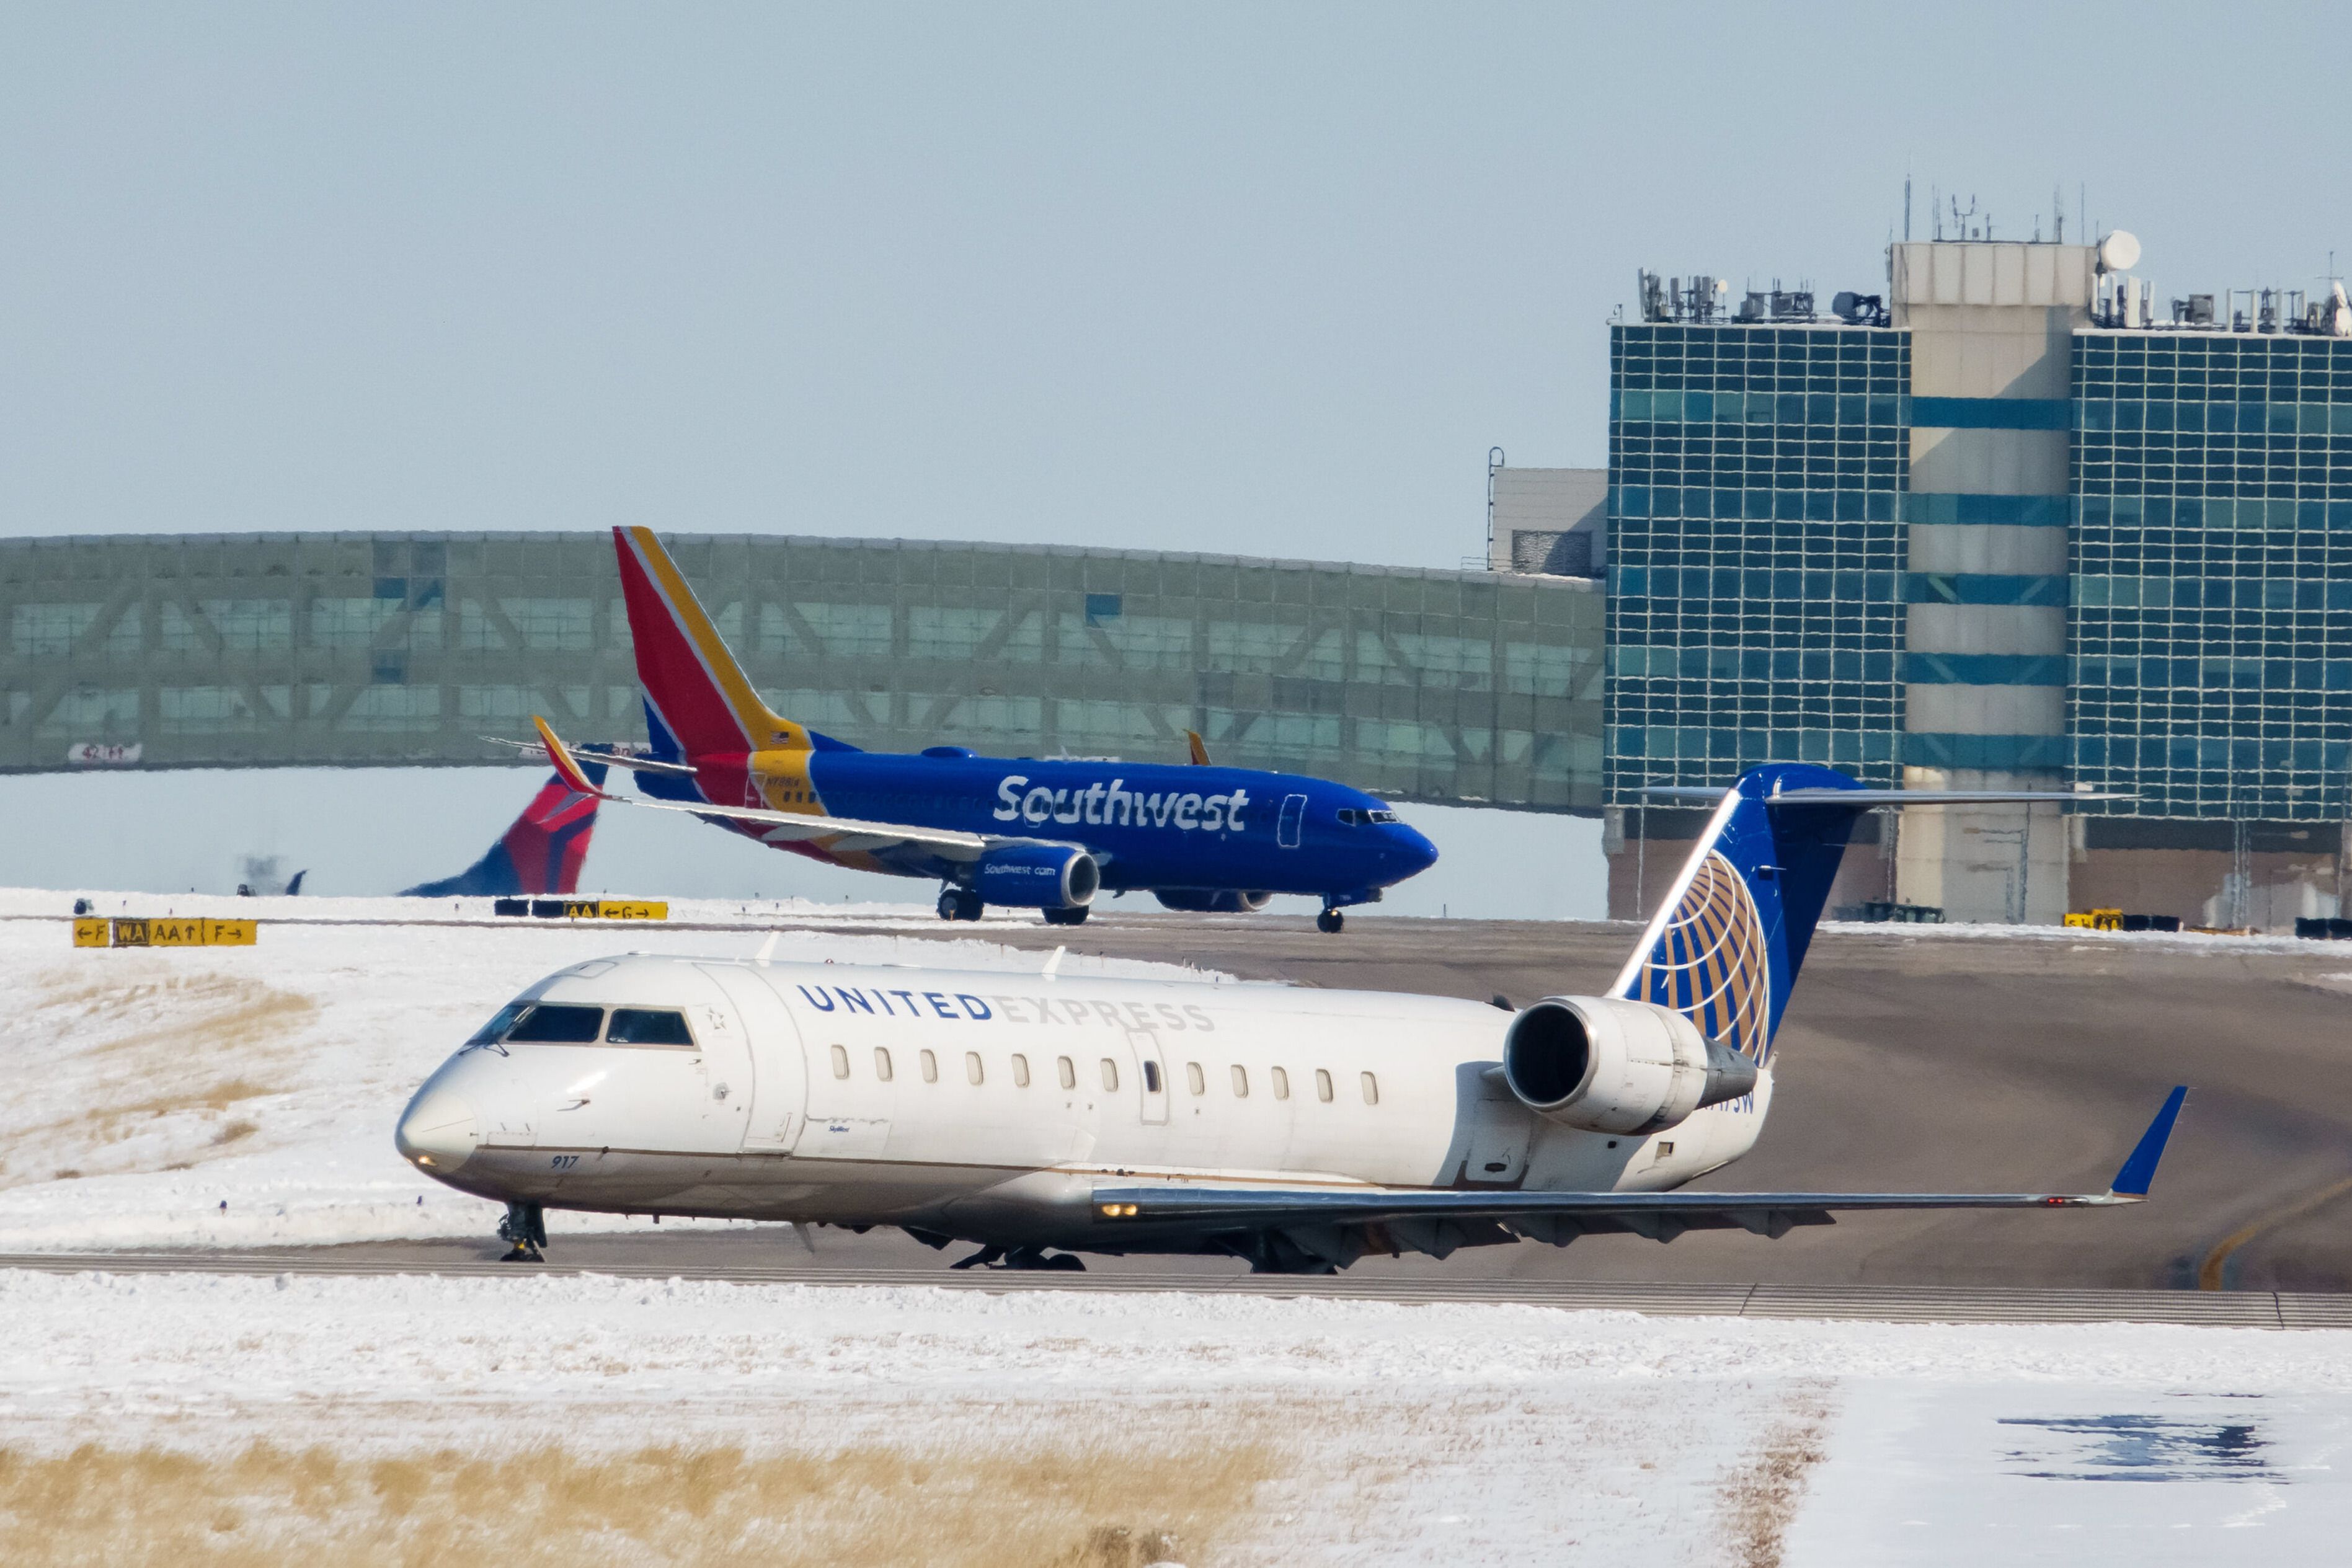 A United Express plane in front of a Southwest Airlines jet and the tails of Delta Air Lines and Frontier Airlines.